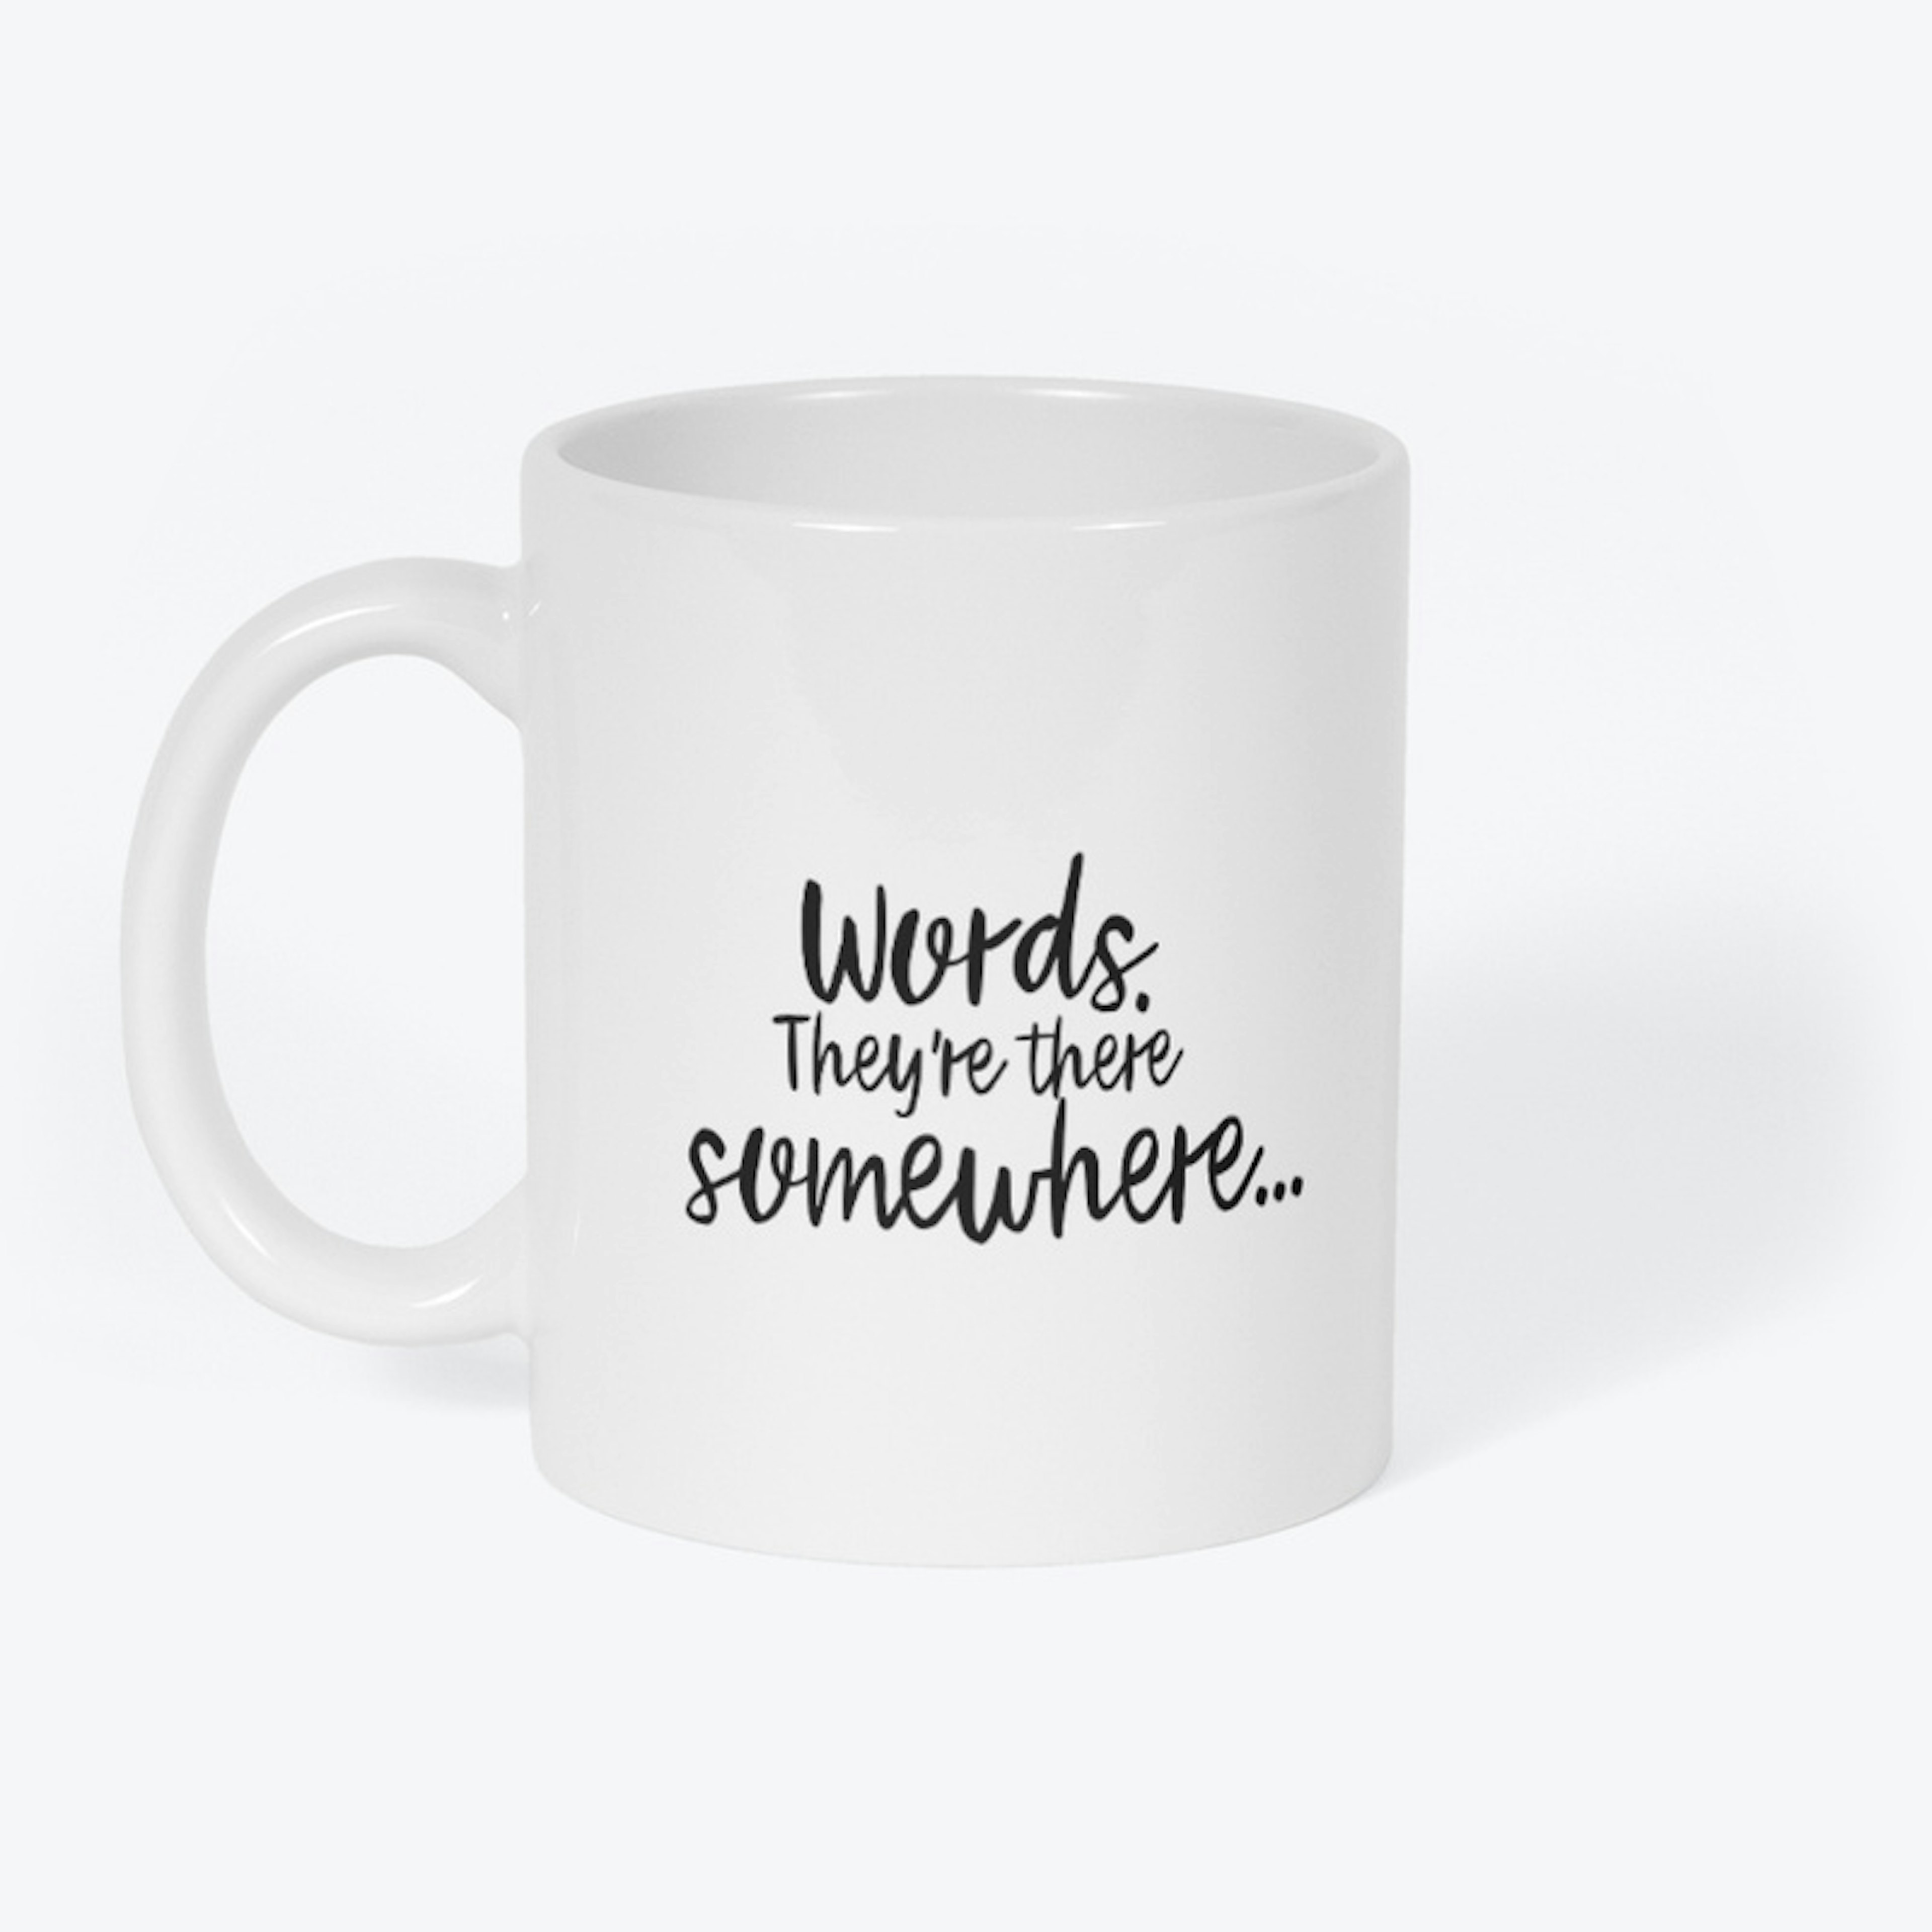 Words They're There Somewhere Mug